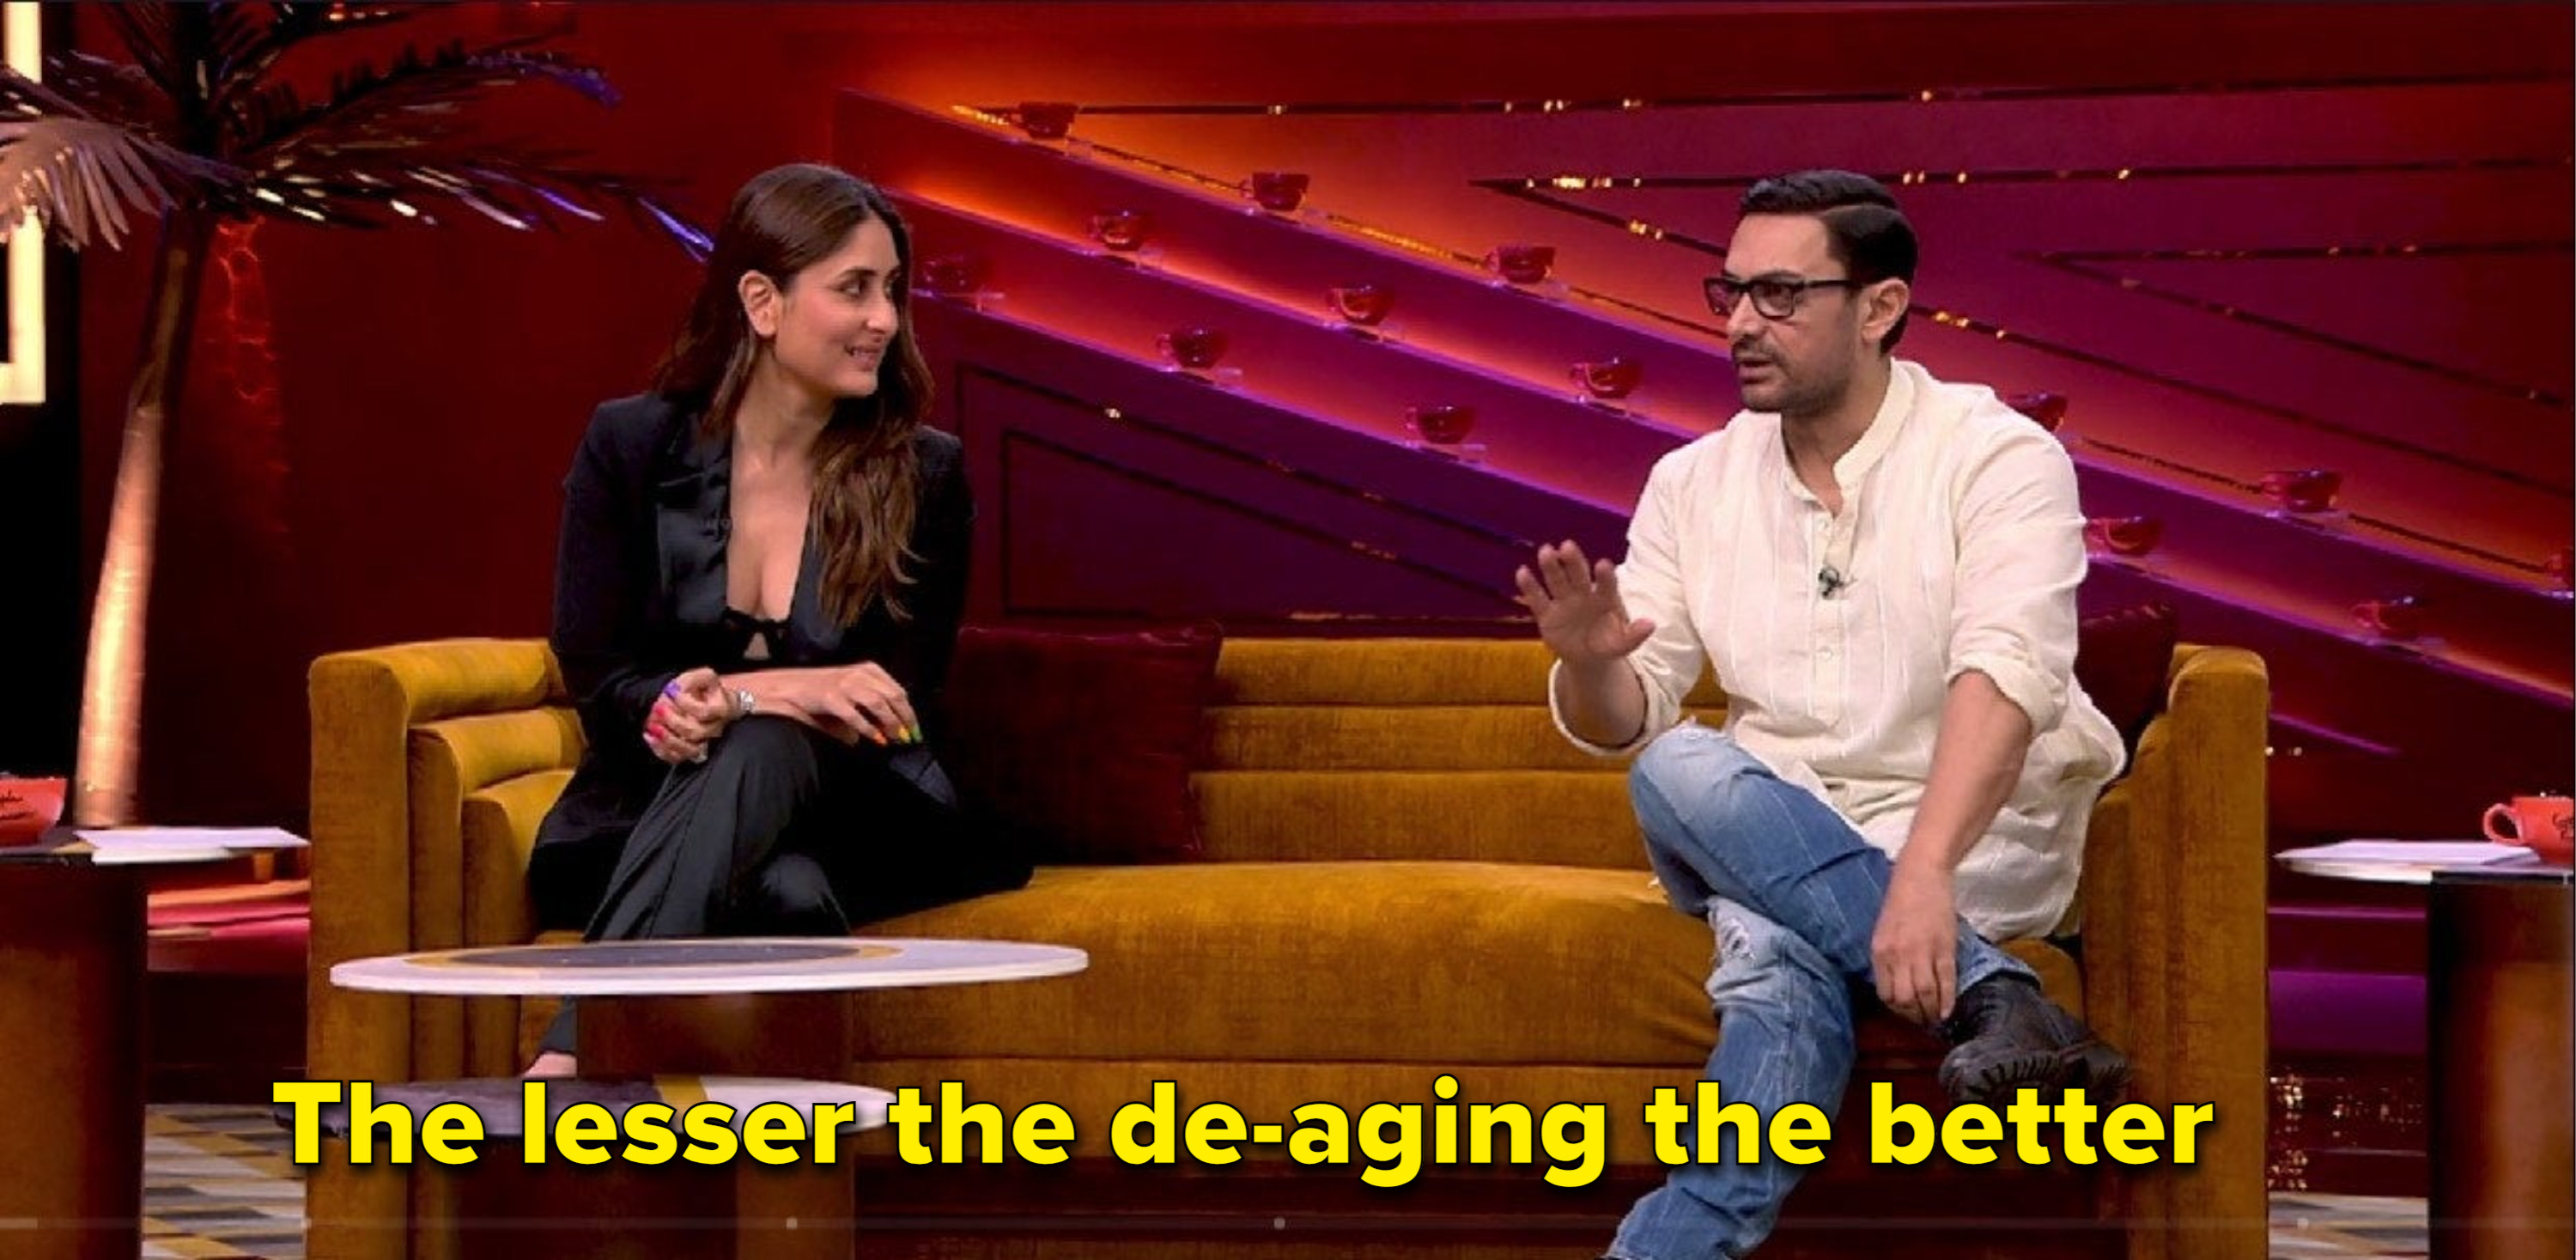 Kareena Kapoor Khan on the left and Aamir Khan on the right sitting on the couch on Koffee With Karan